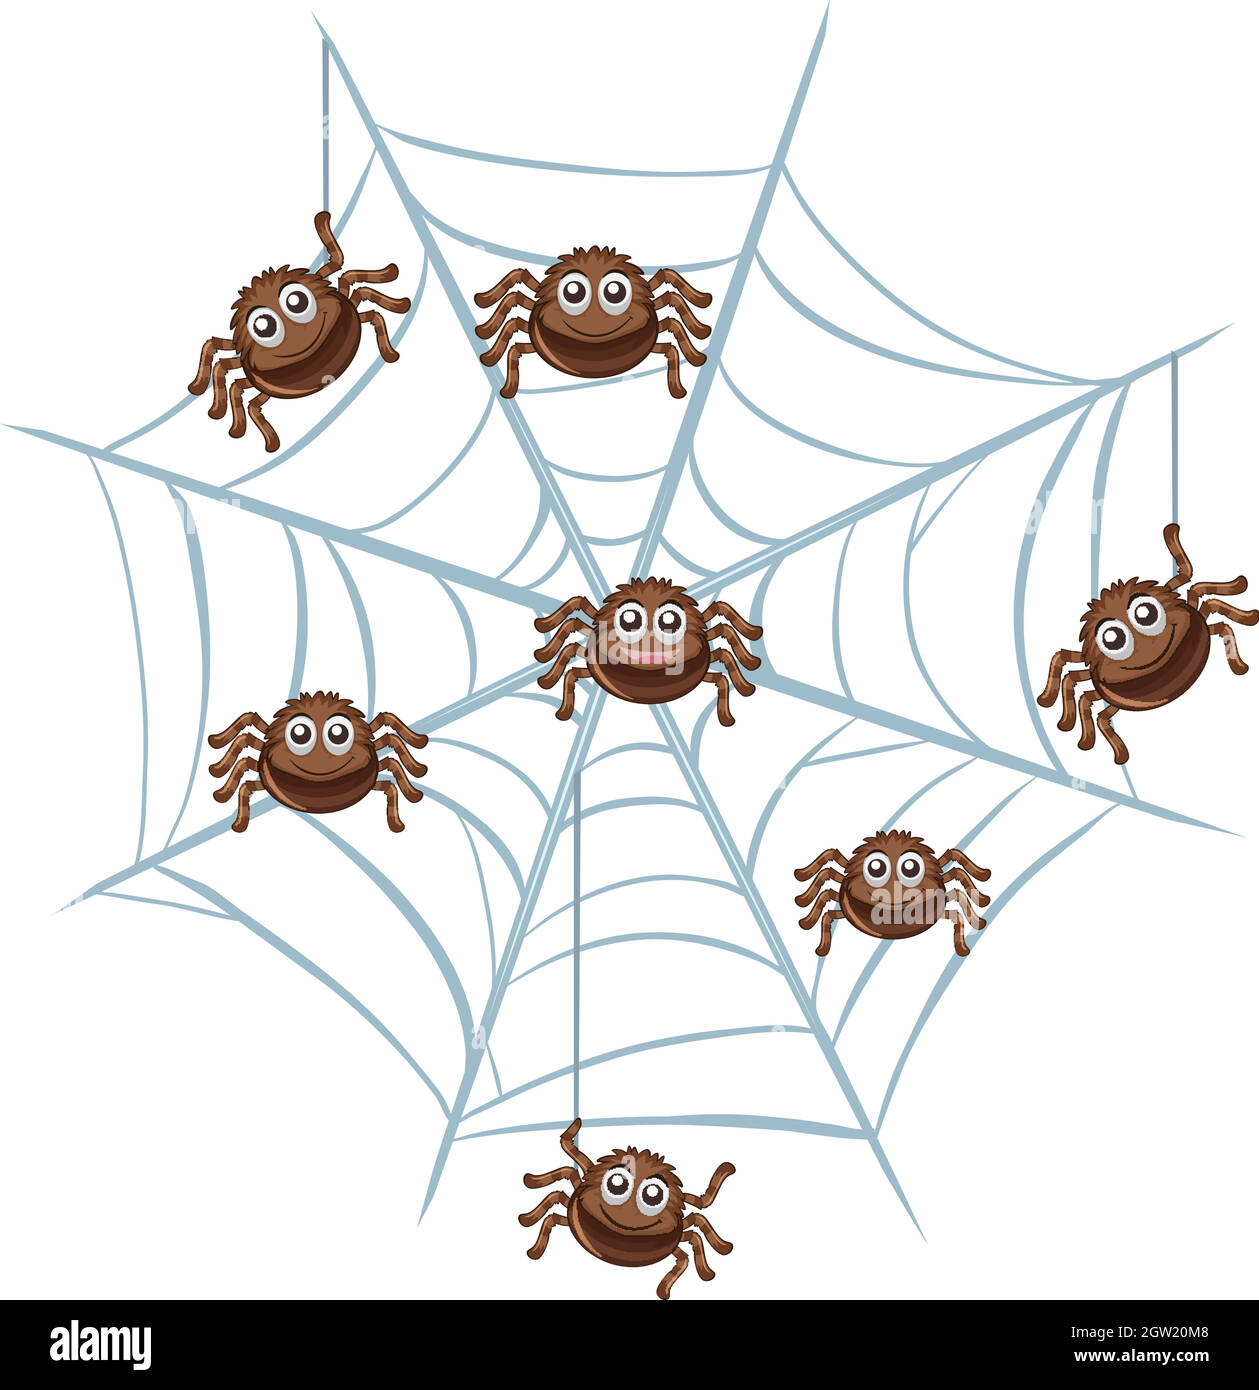 39 Webspider Images, Stock Photos, 3D objects, & Vectors